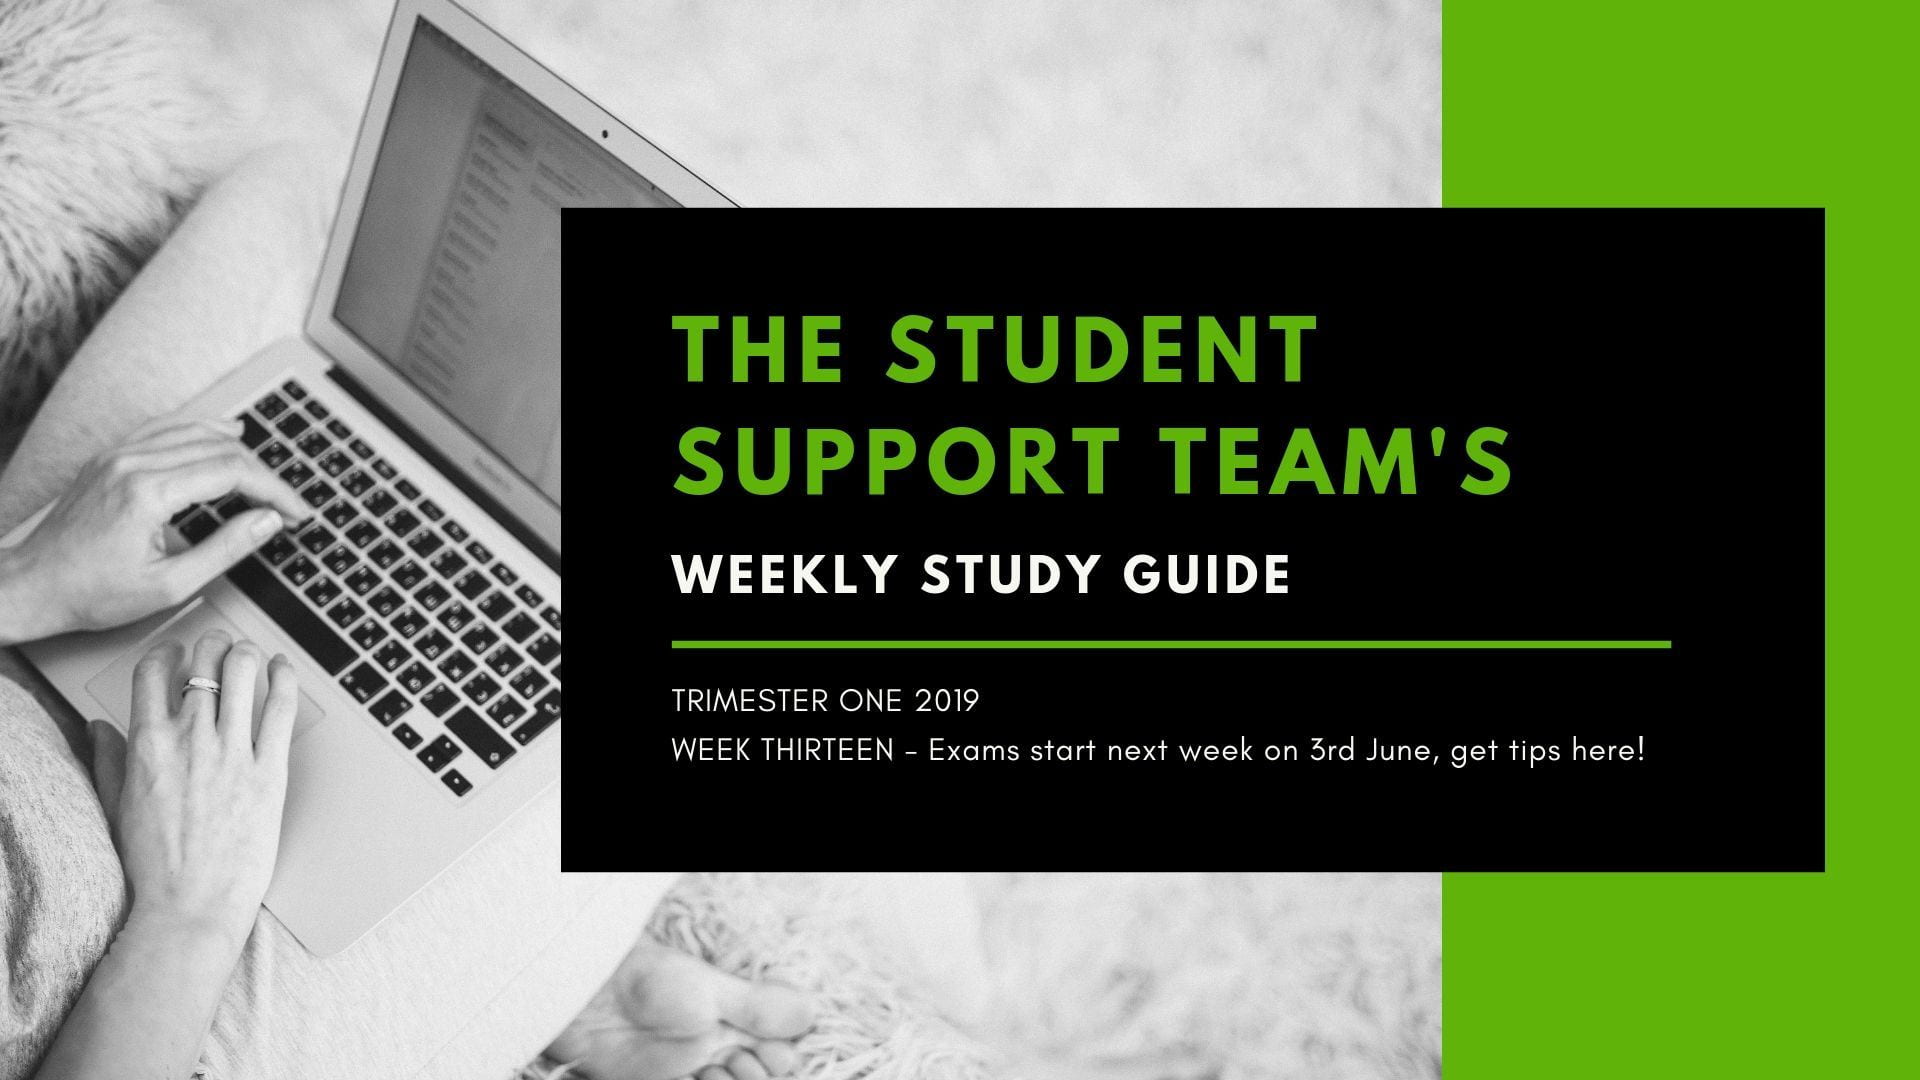 The Student Support Team’s Weekly Study Guide: Week Thirteen; Get Study Tips and Tricks